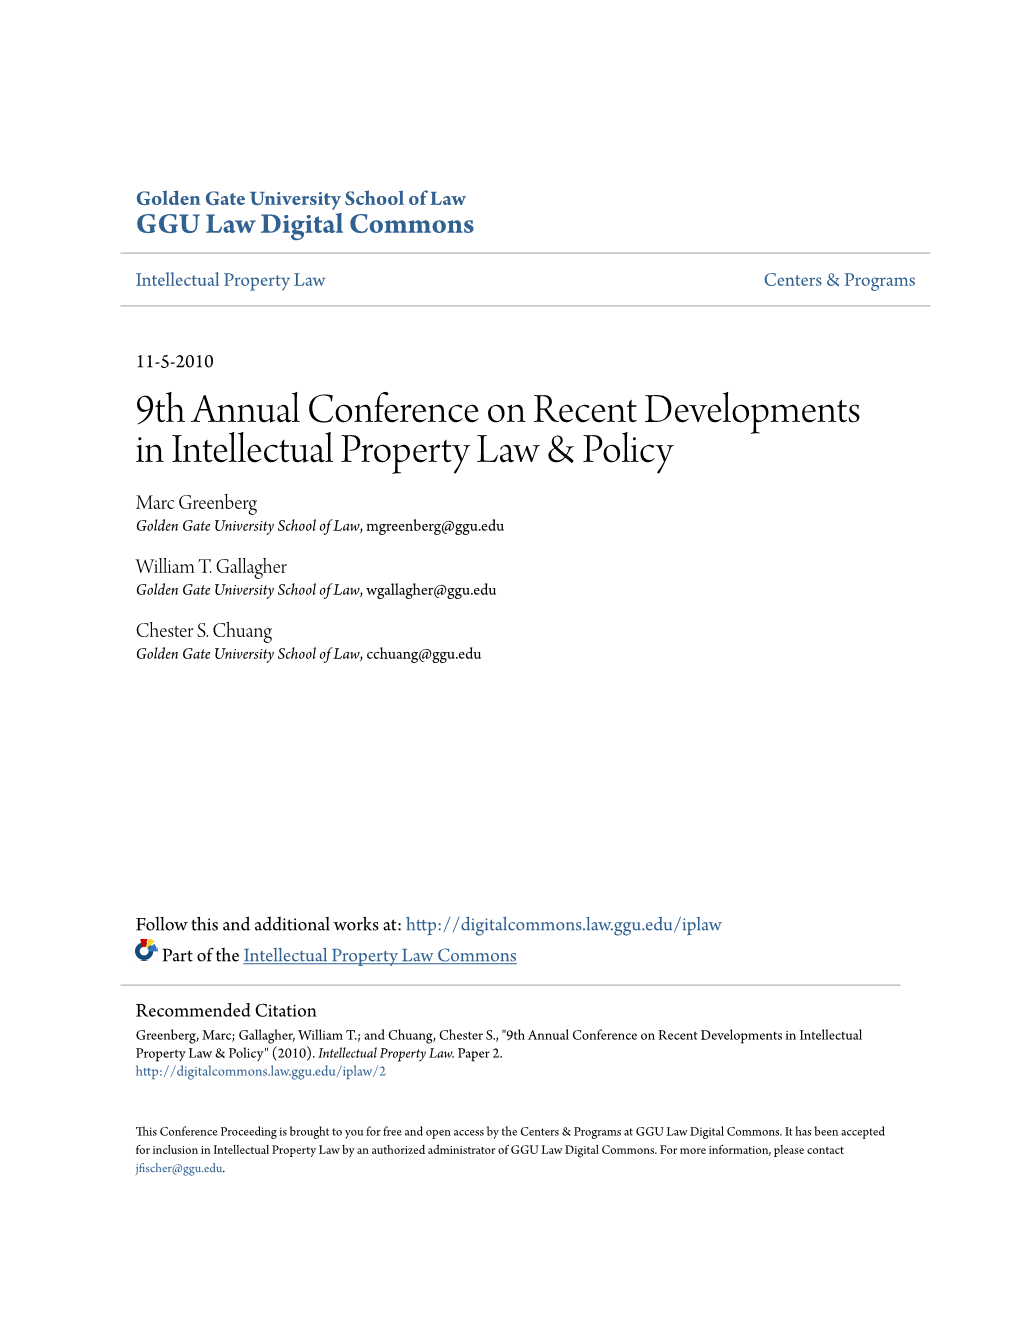 9Th Annual Conference on Recent Developments in Intellectual Property Law & Policy Marc Greenberg Golden Gate University School of Law, Mgreenberg@Ggu.Edu